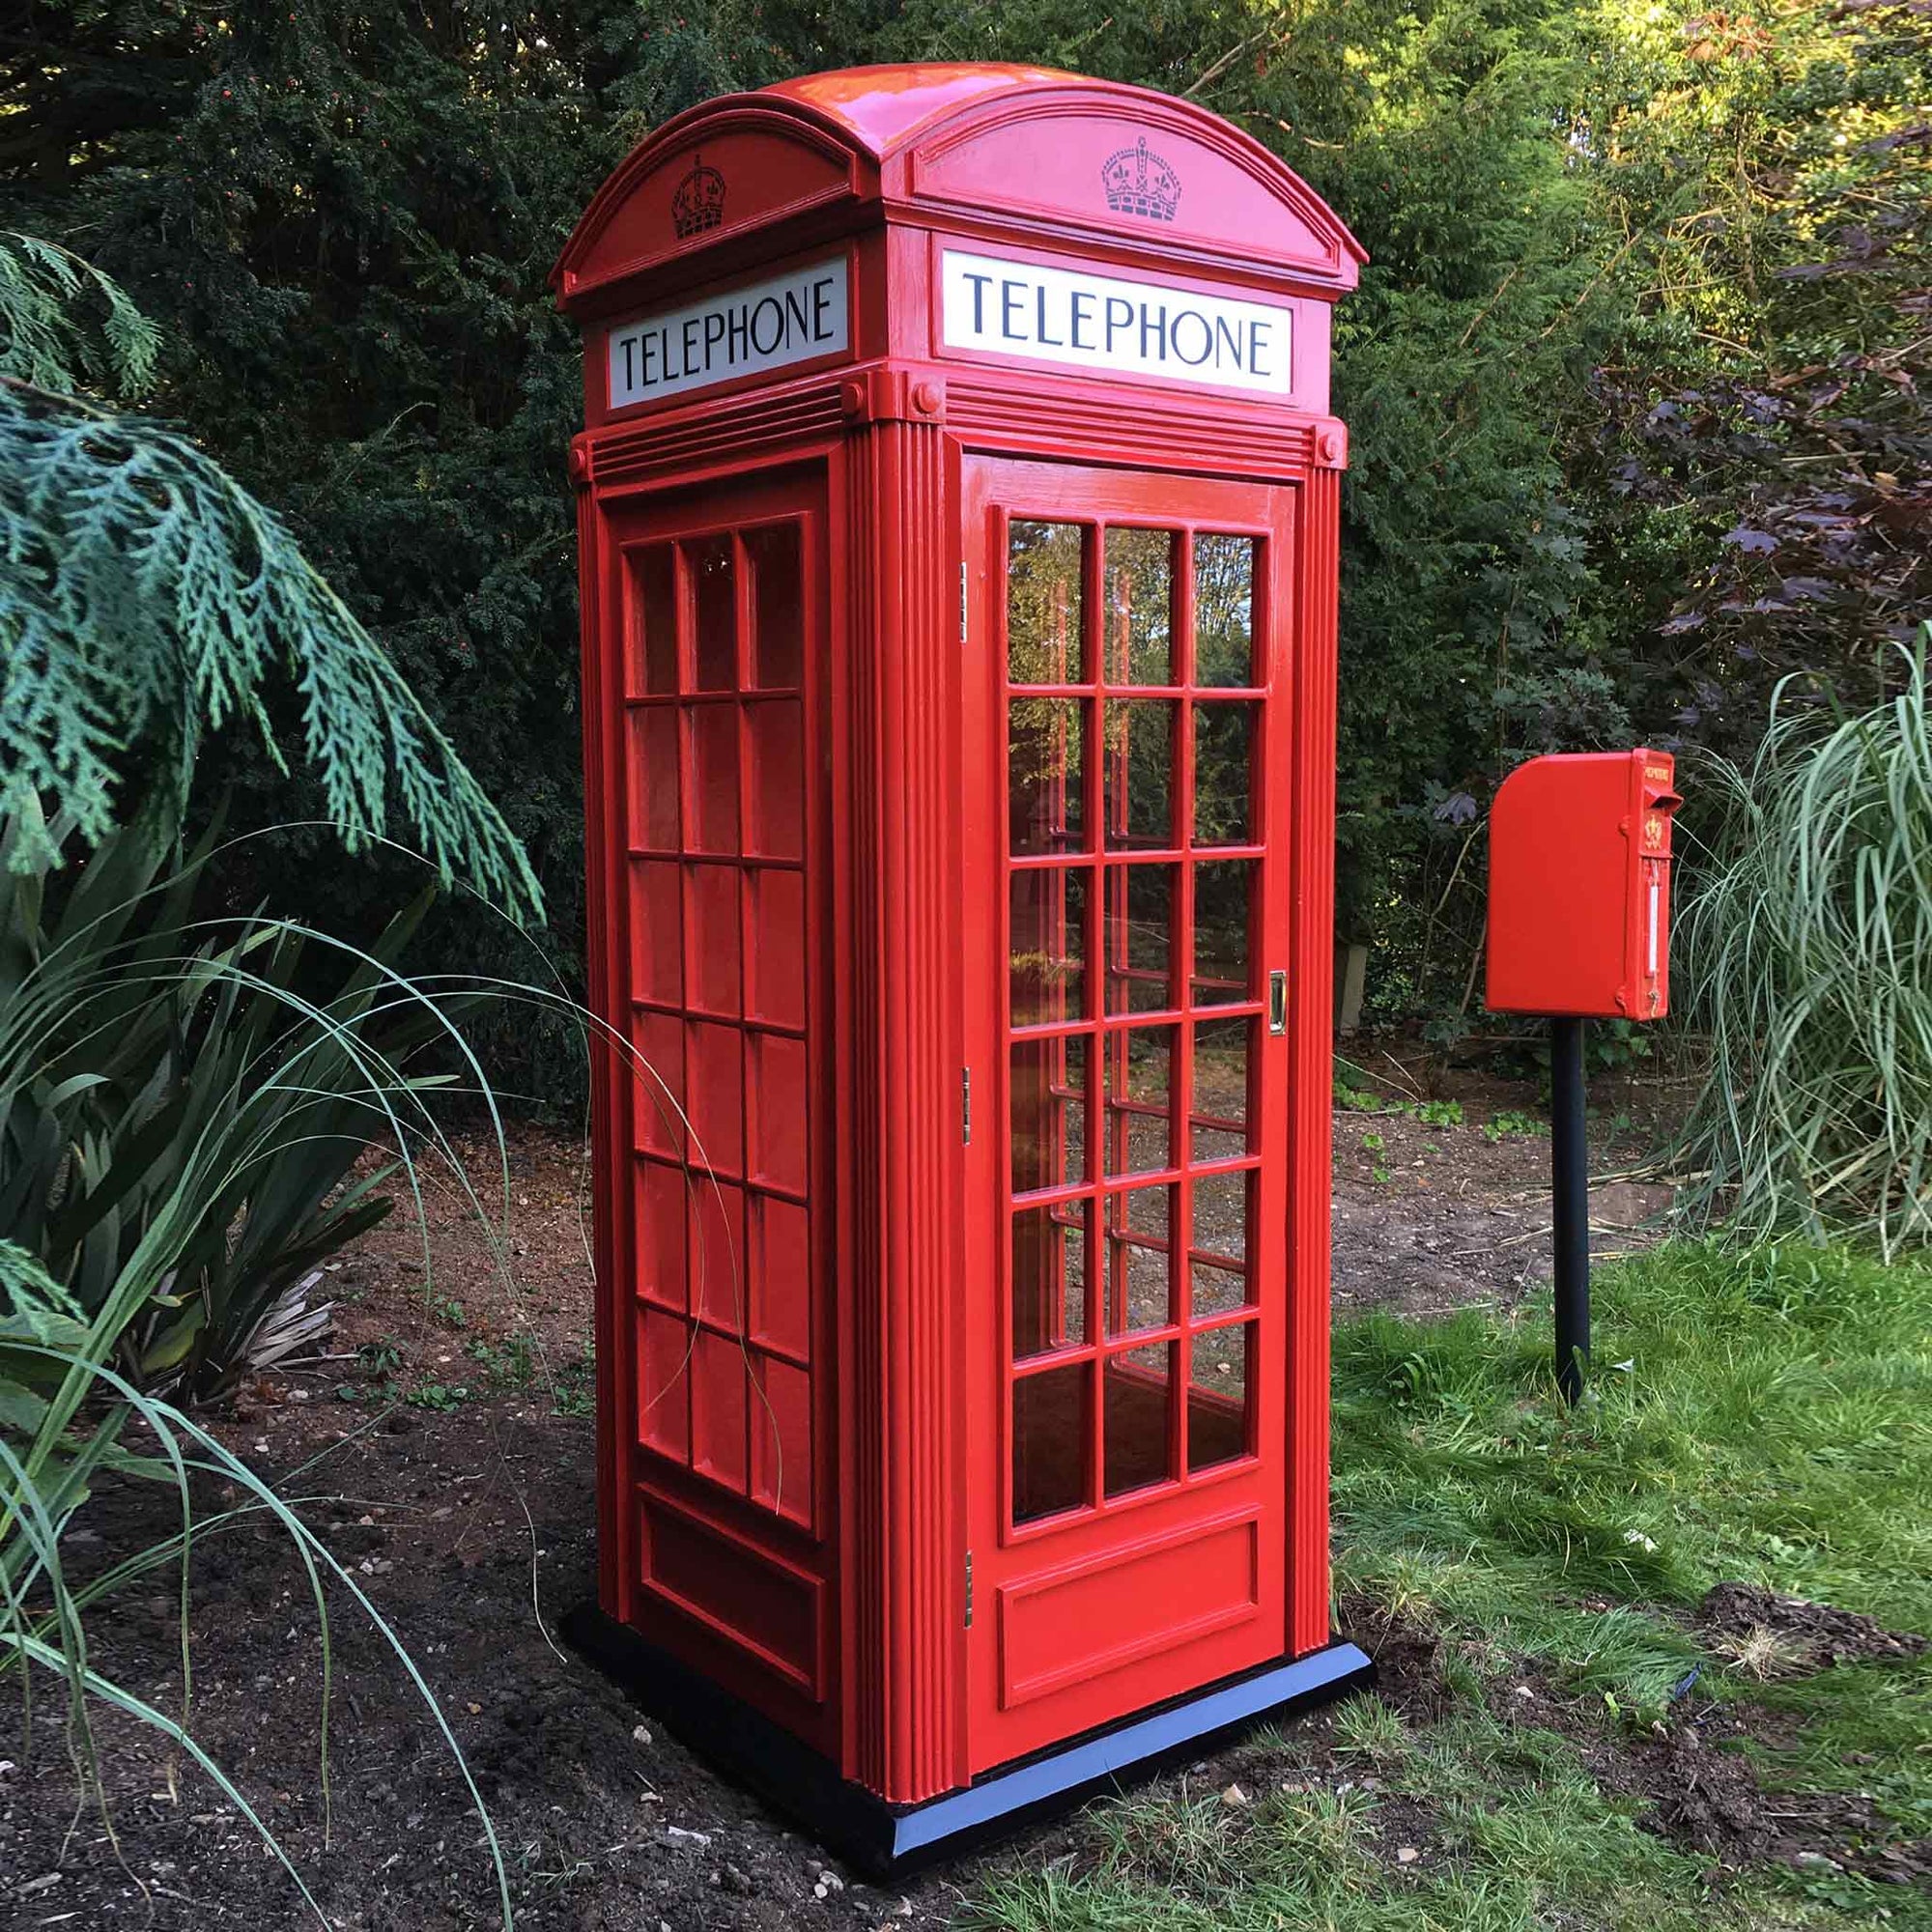 Full Side K2 Red Telephone Box | London Style Kiosk | For Sale Replica | Warden's Crafts & Creations